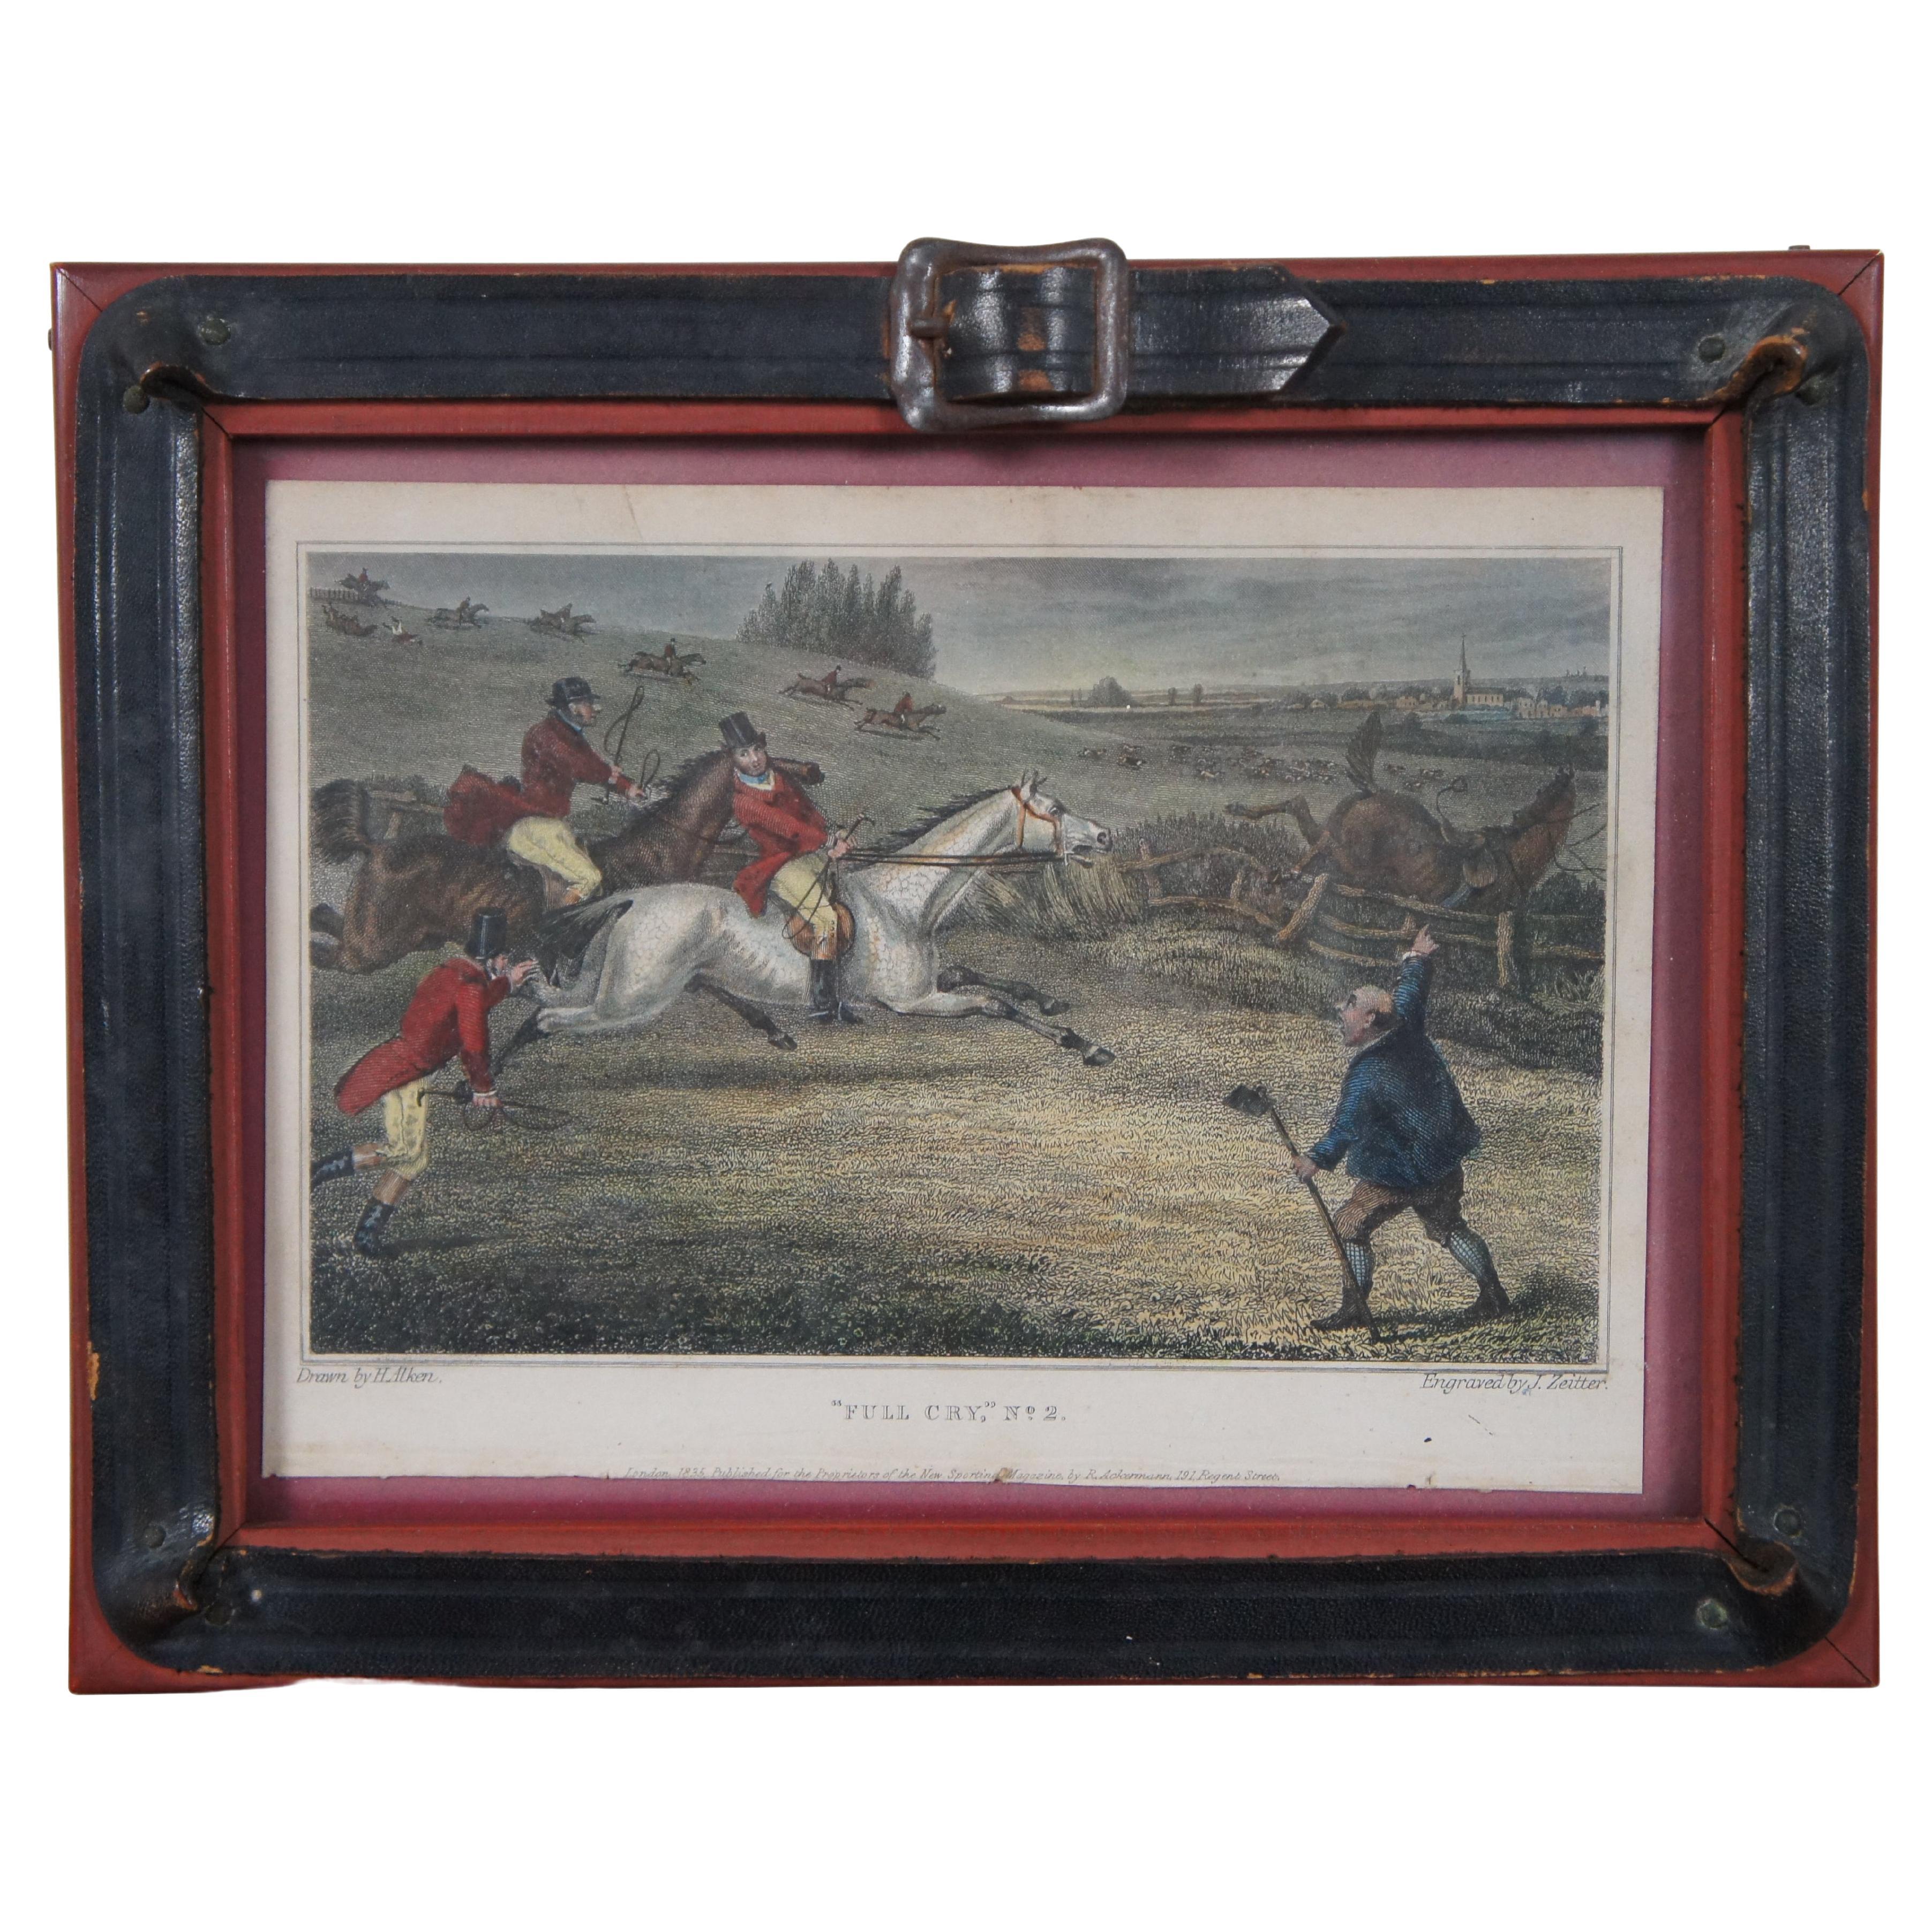 Antique 1835 Hand Colored Fox Hunt Engraving Full Cry Horse Equestrian